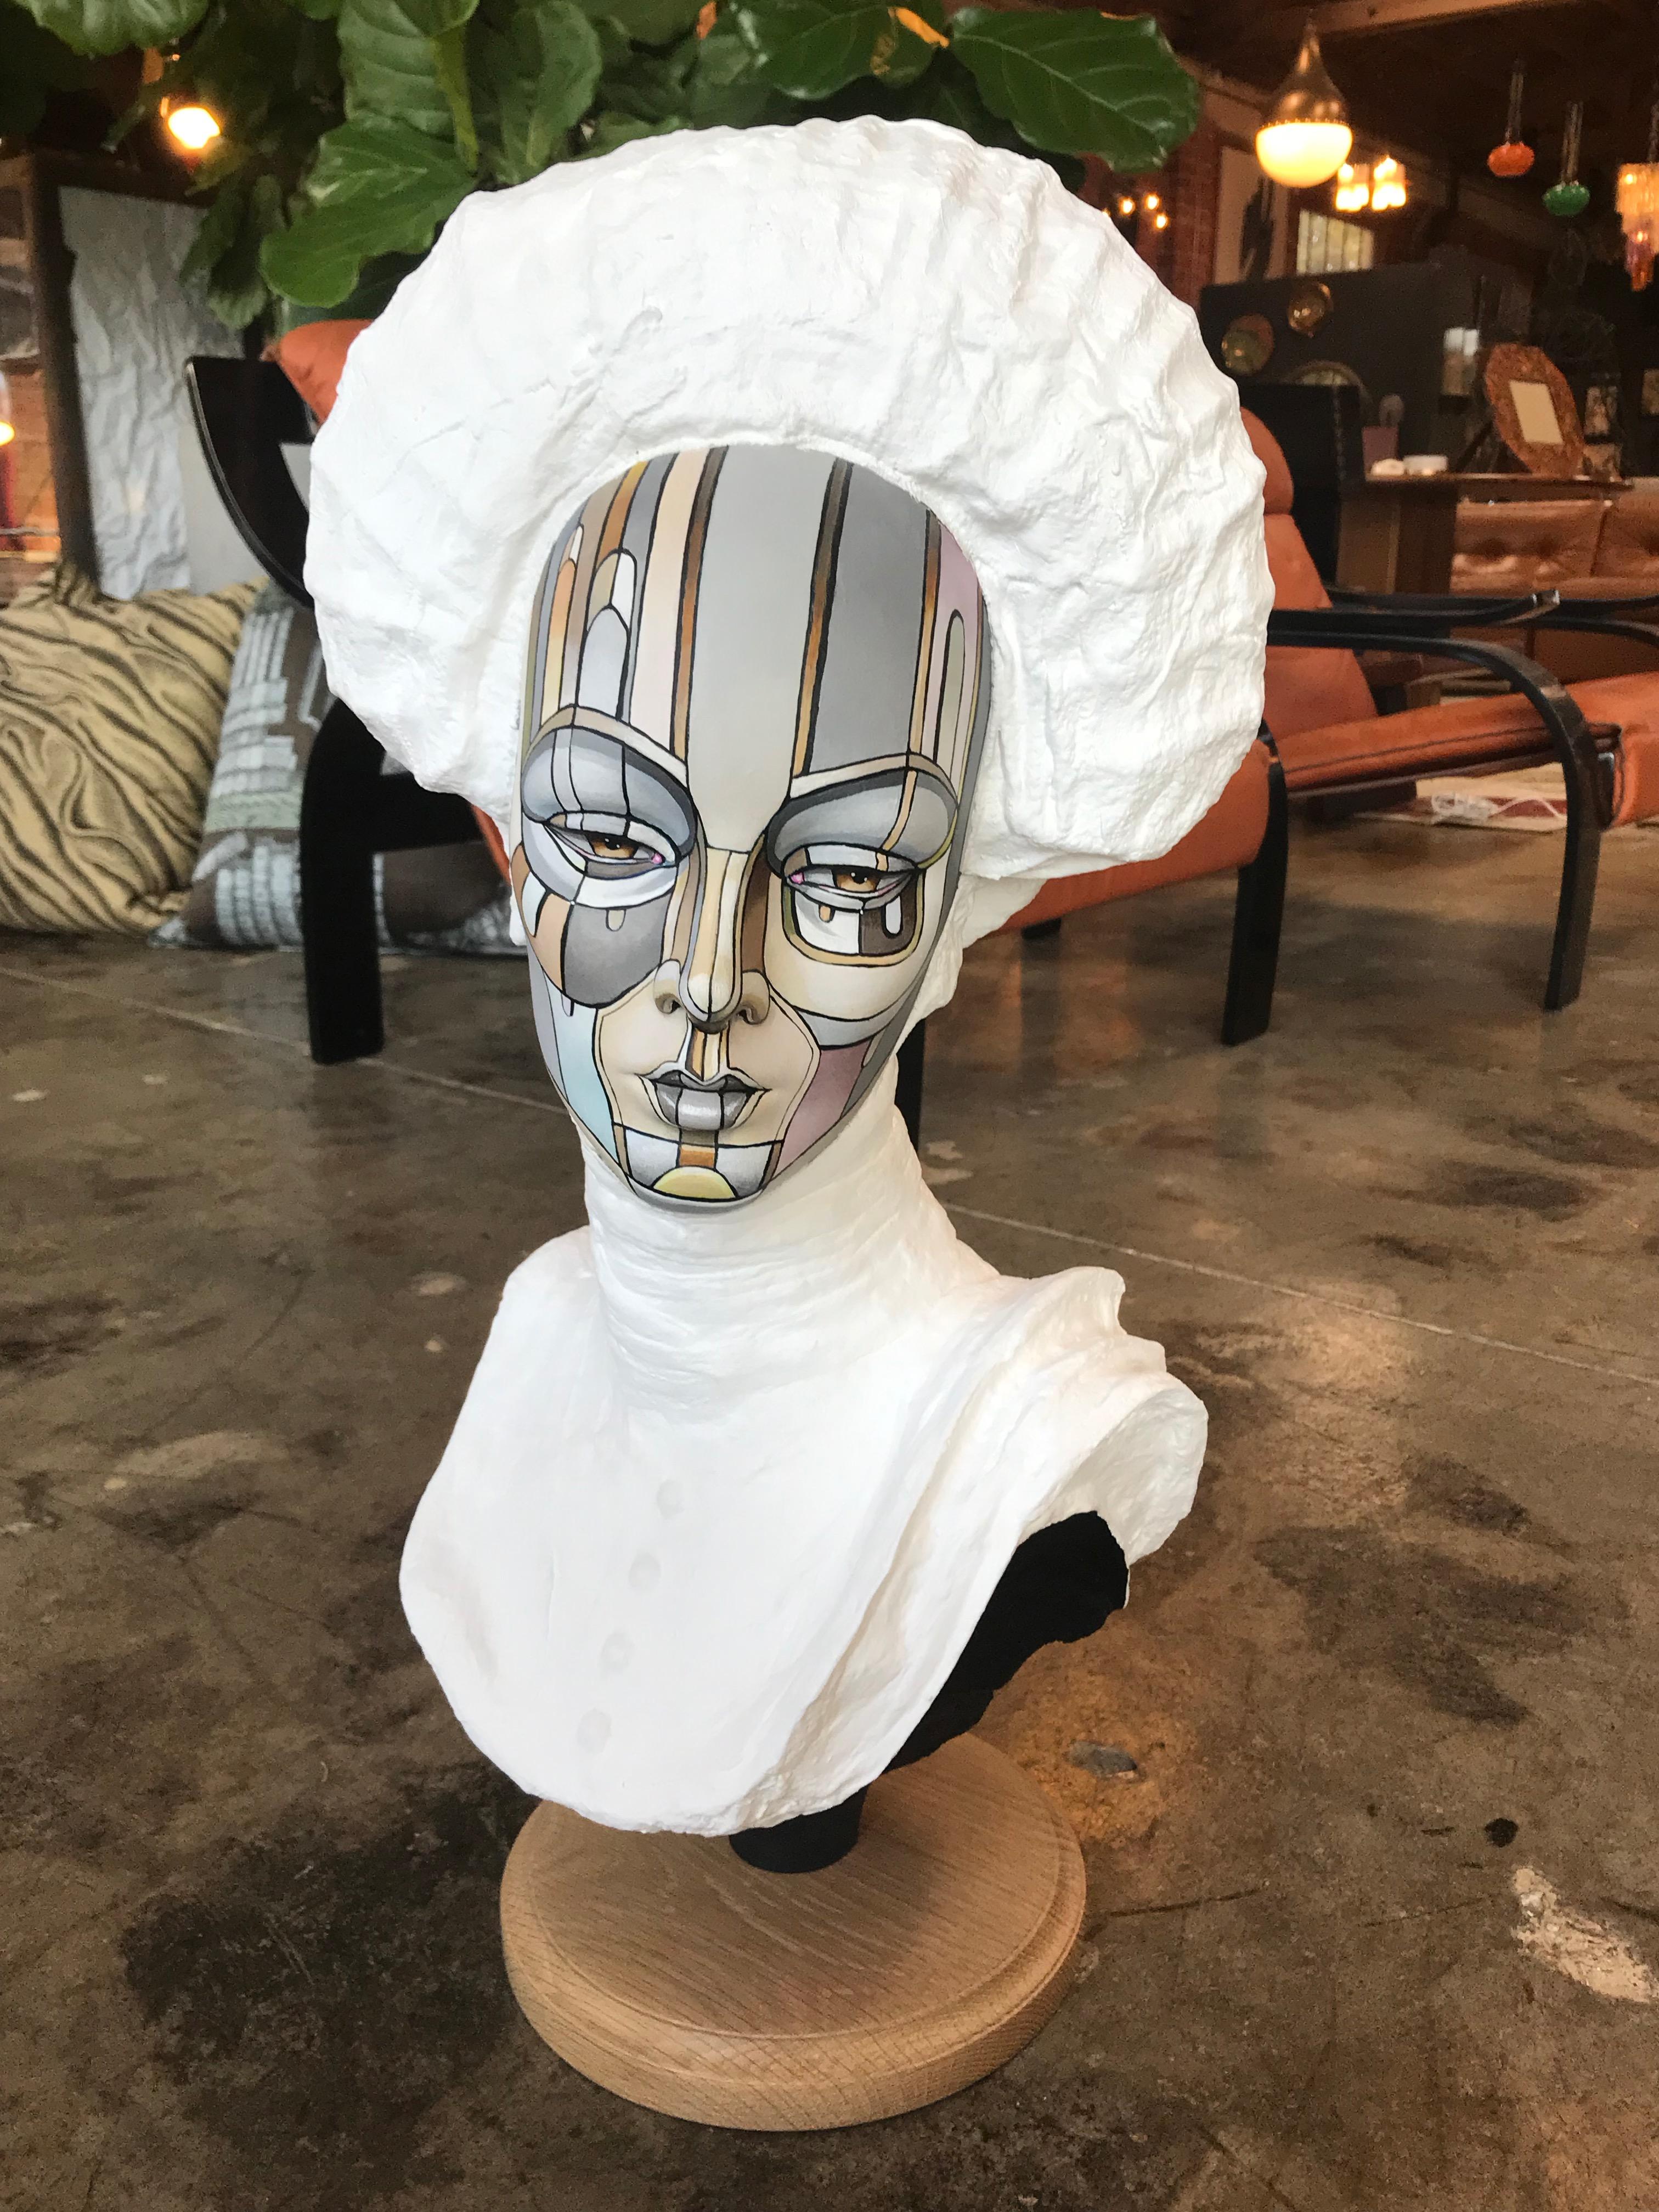 Bust of a young women, Signed David Gilmore, USA, 2019.
Each bust started with a vintage mannequin head which was then placed on either a metal or glass Stand. The artist, David Gilmore, painted a pattern over their faces in a similar manner to his